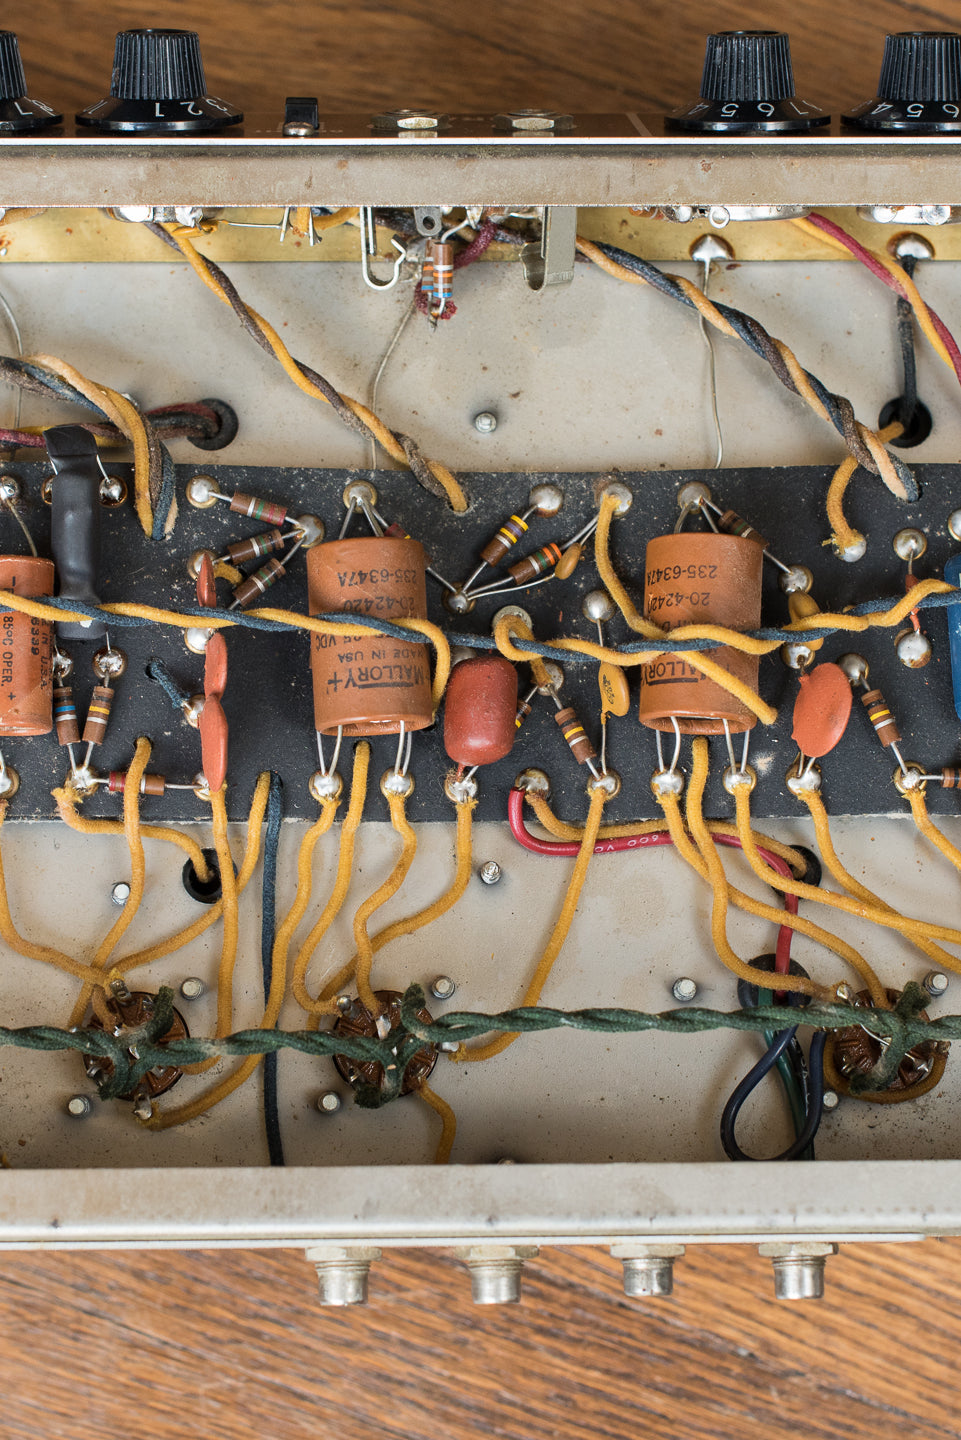 Chassis, circuit board, 1964 Fender Vibroverb amp